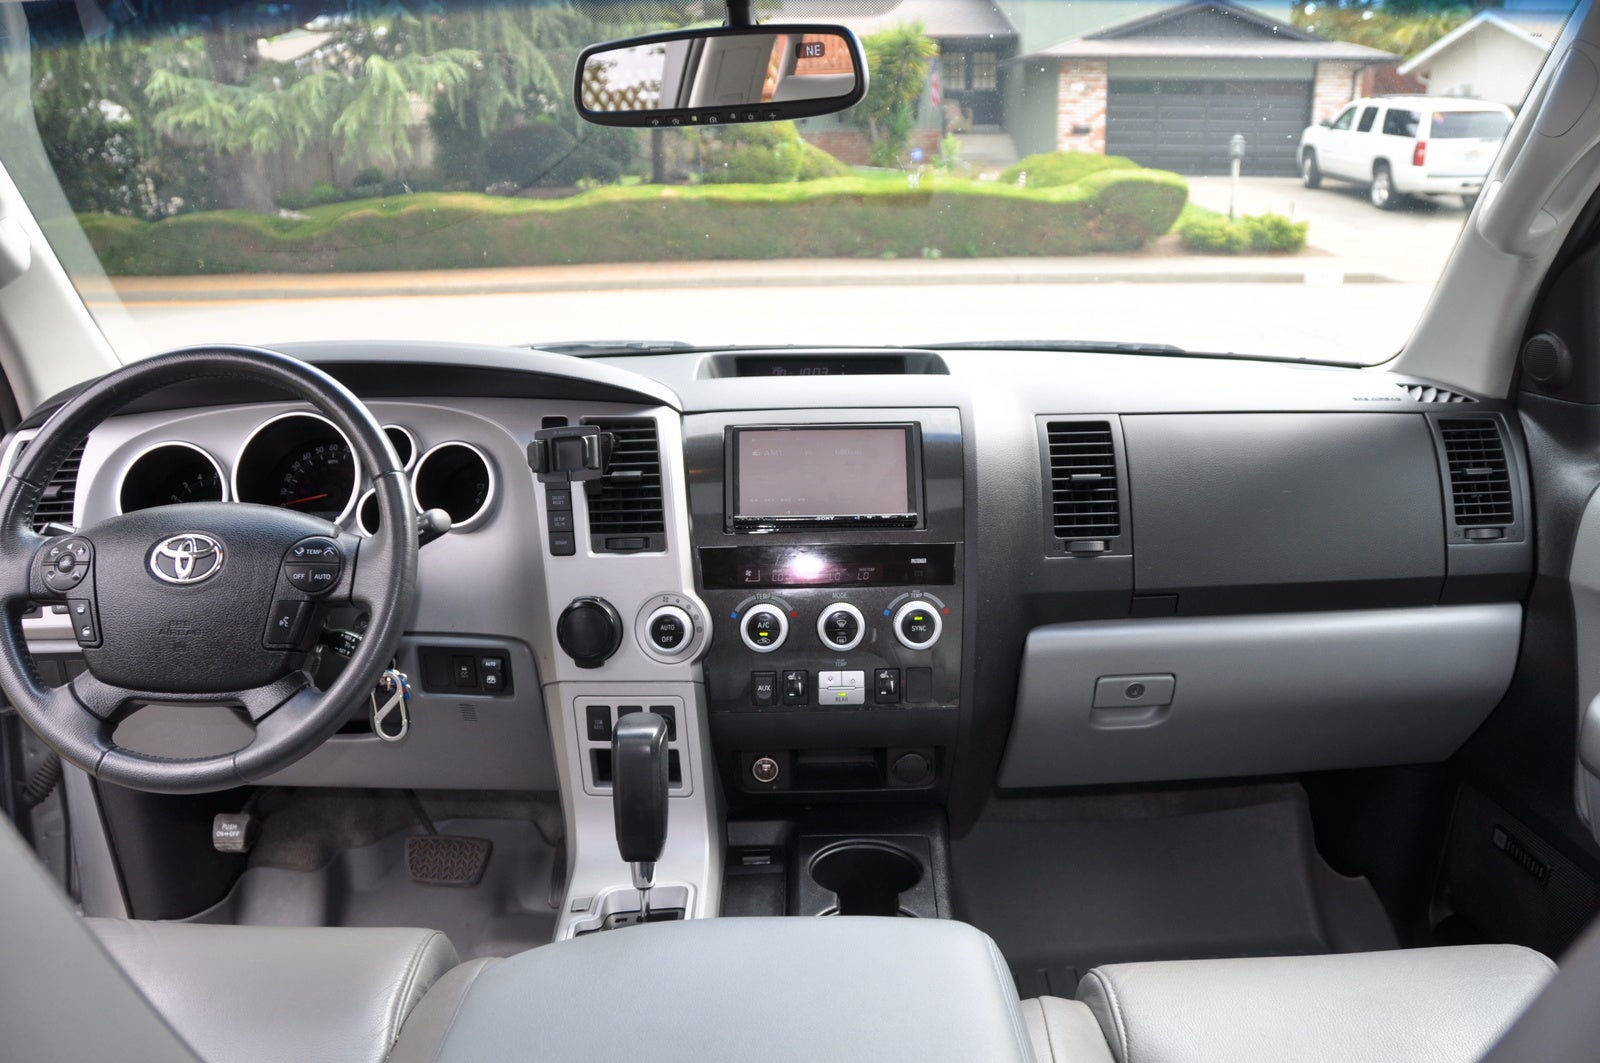 Picture Of 2008 Toyota Sequoia Limited Interior, 1600x1063 in 541.0KB. 